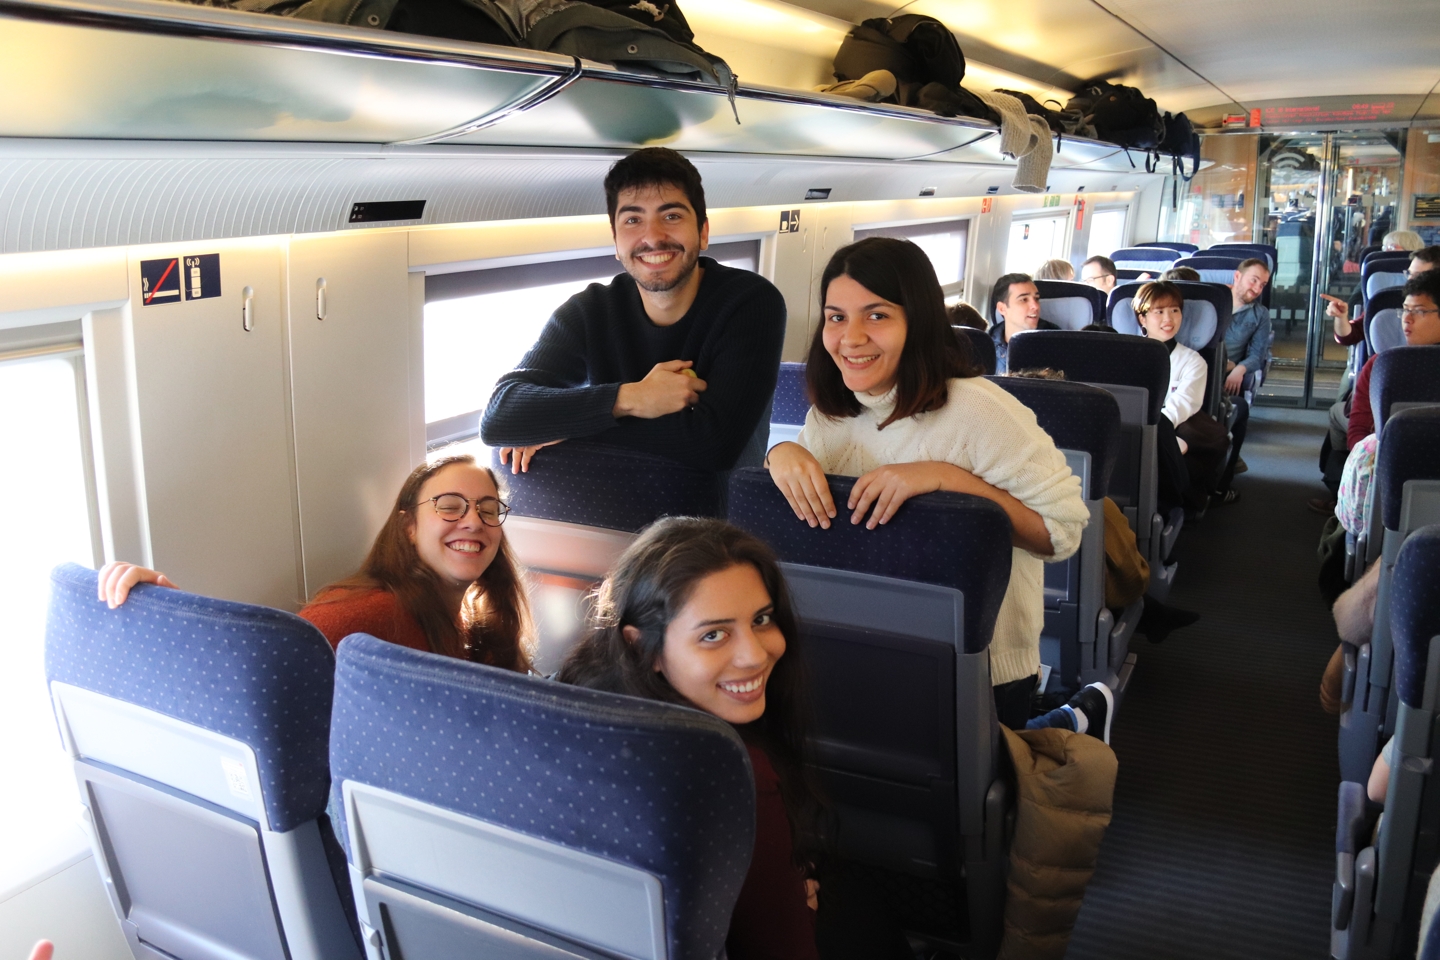 Students in the train to Brussels